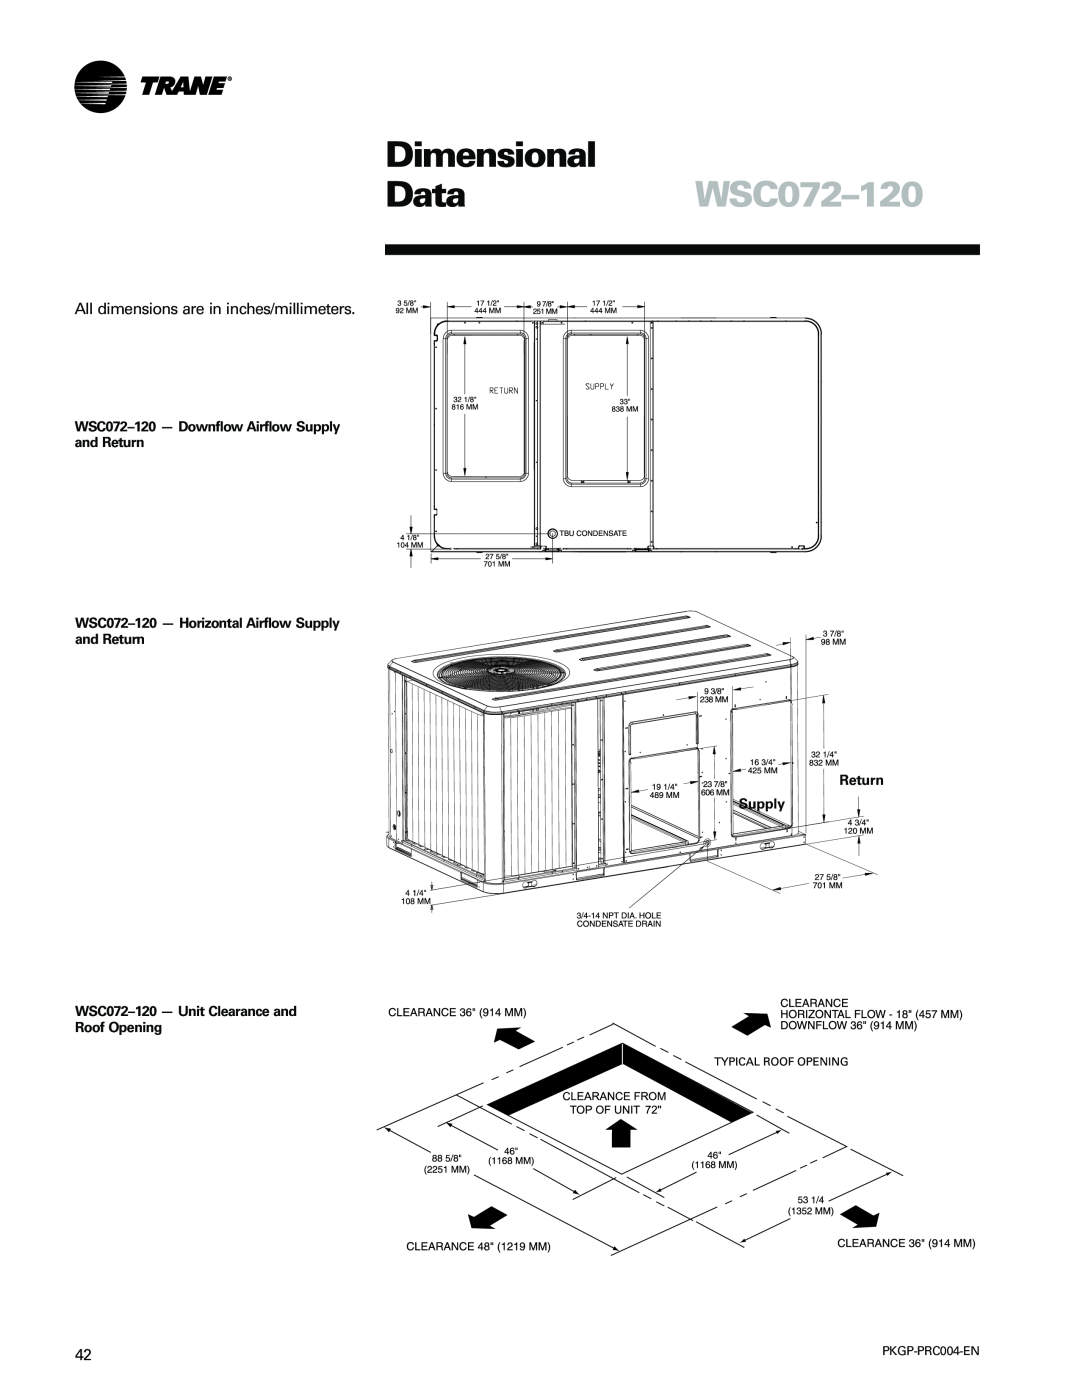 Trane WSC060-120 manual Dimensional, DataWSC072-120, WSC072-120- Downflow Airflow Supply and Return, Roof Opening 